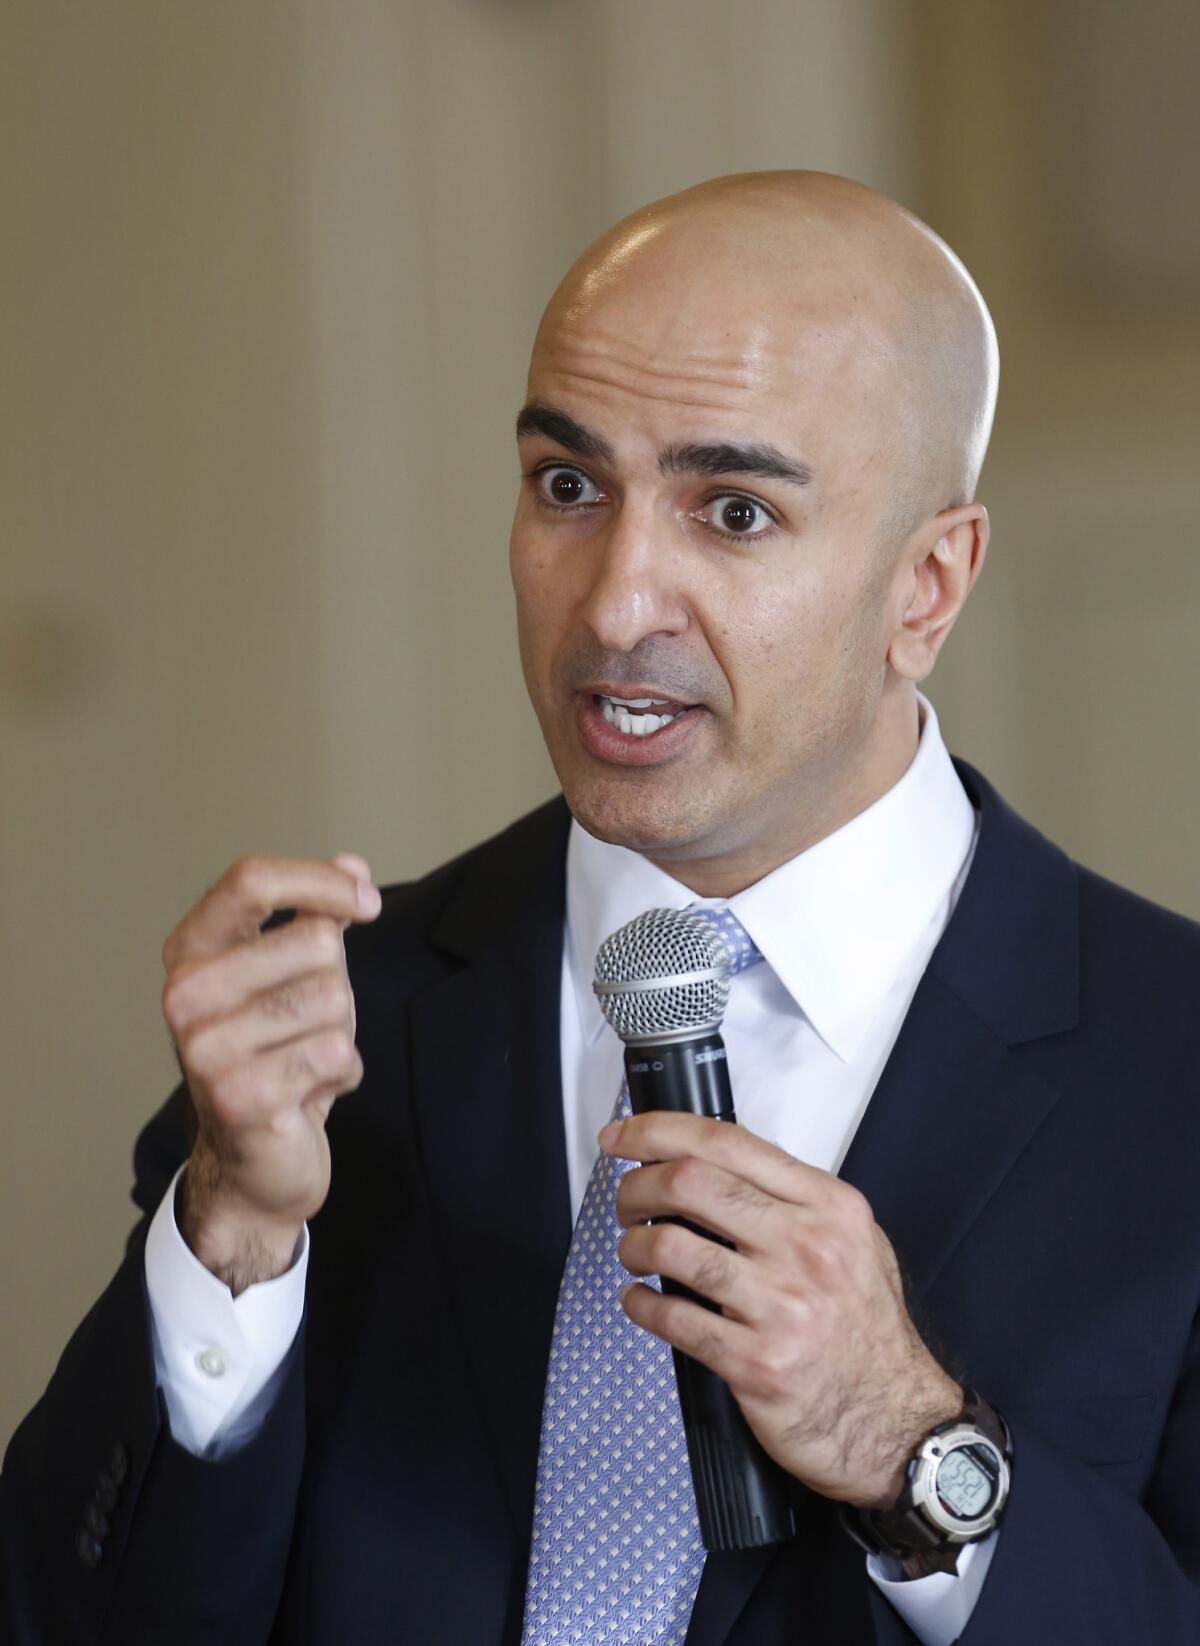 Republican candidate for governor Neel Kashkari speaks at the Sacramento Press Club on Thursday, blaming Gov. Jerry Brown for widening income inequality in California.